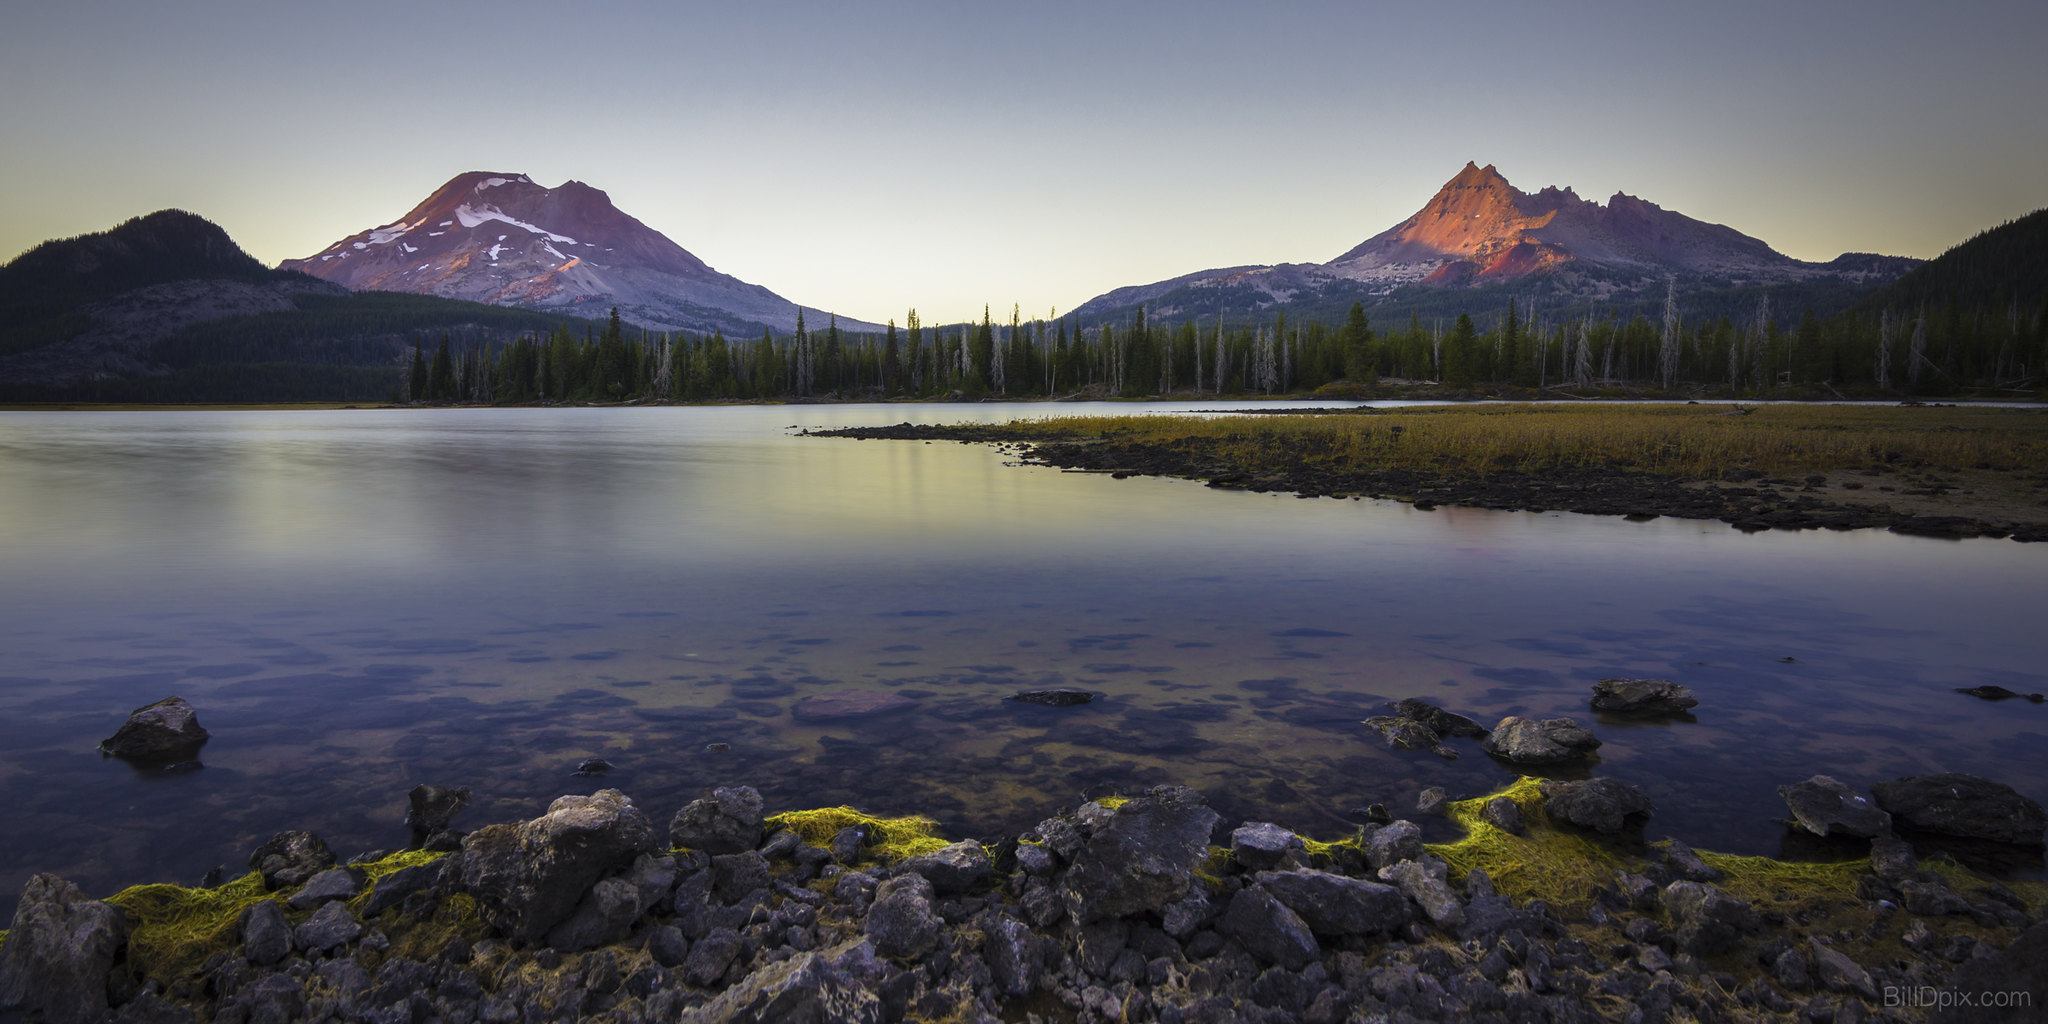 Guide To Sparks Lake: Sparks Lake In Central Oregon Is Simply Breathtaking